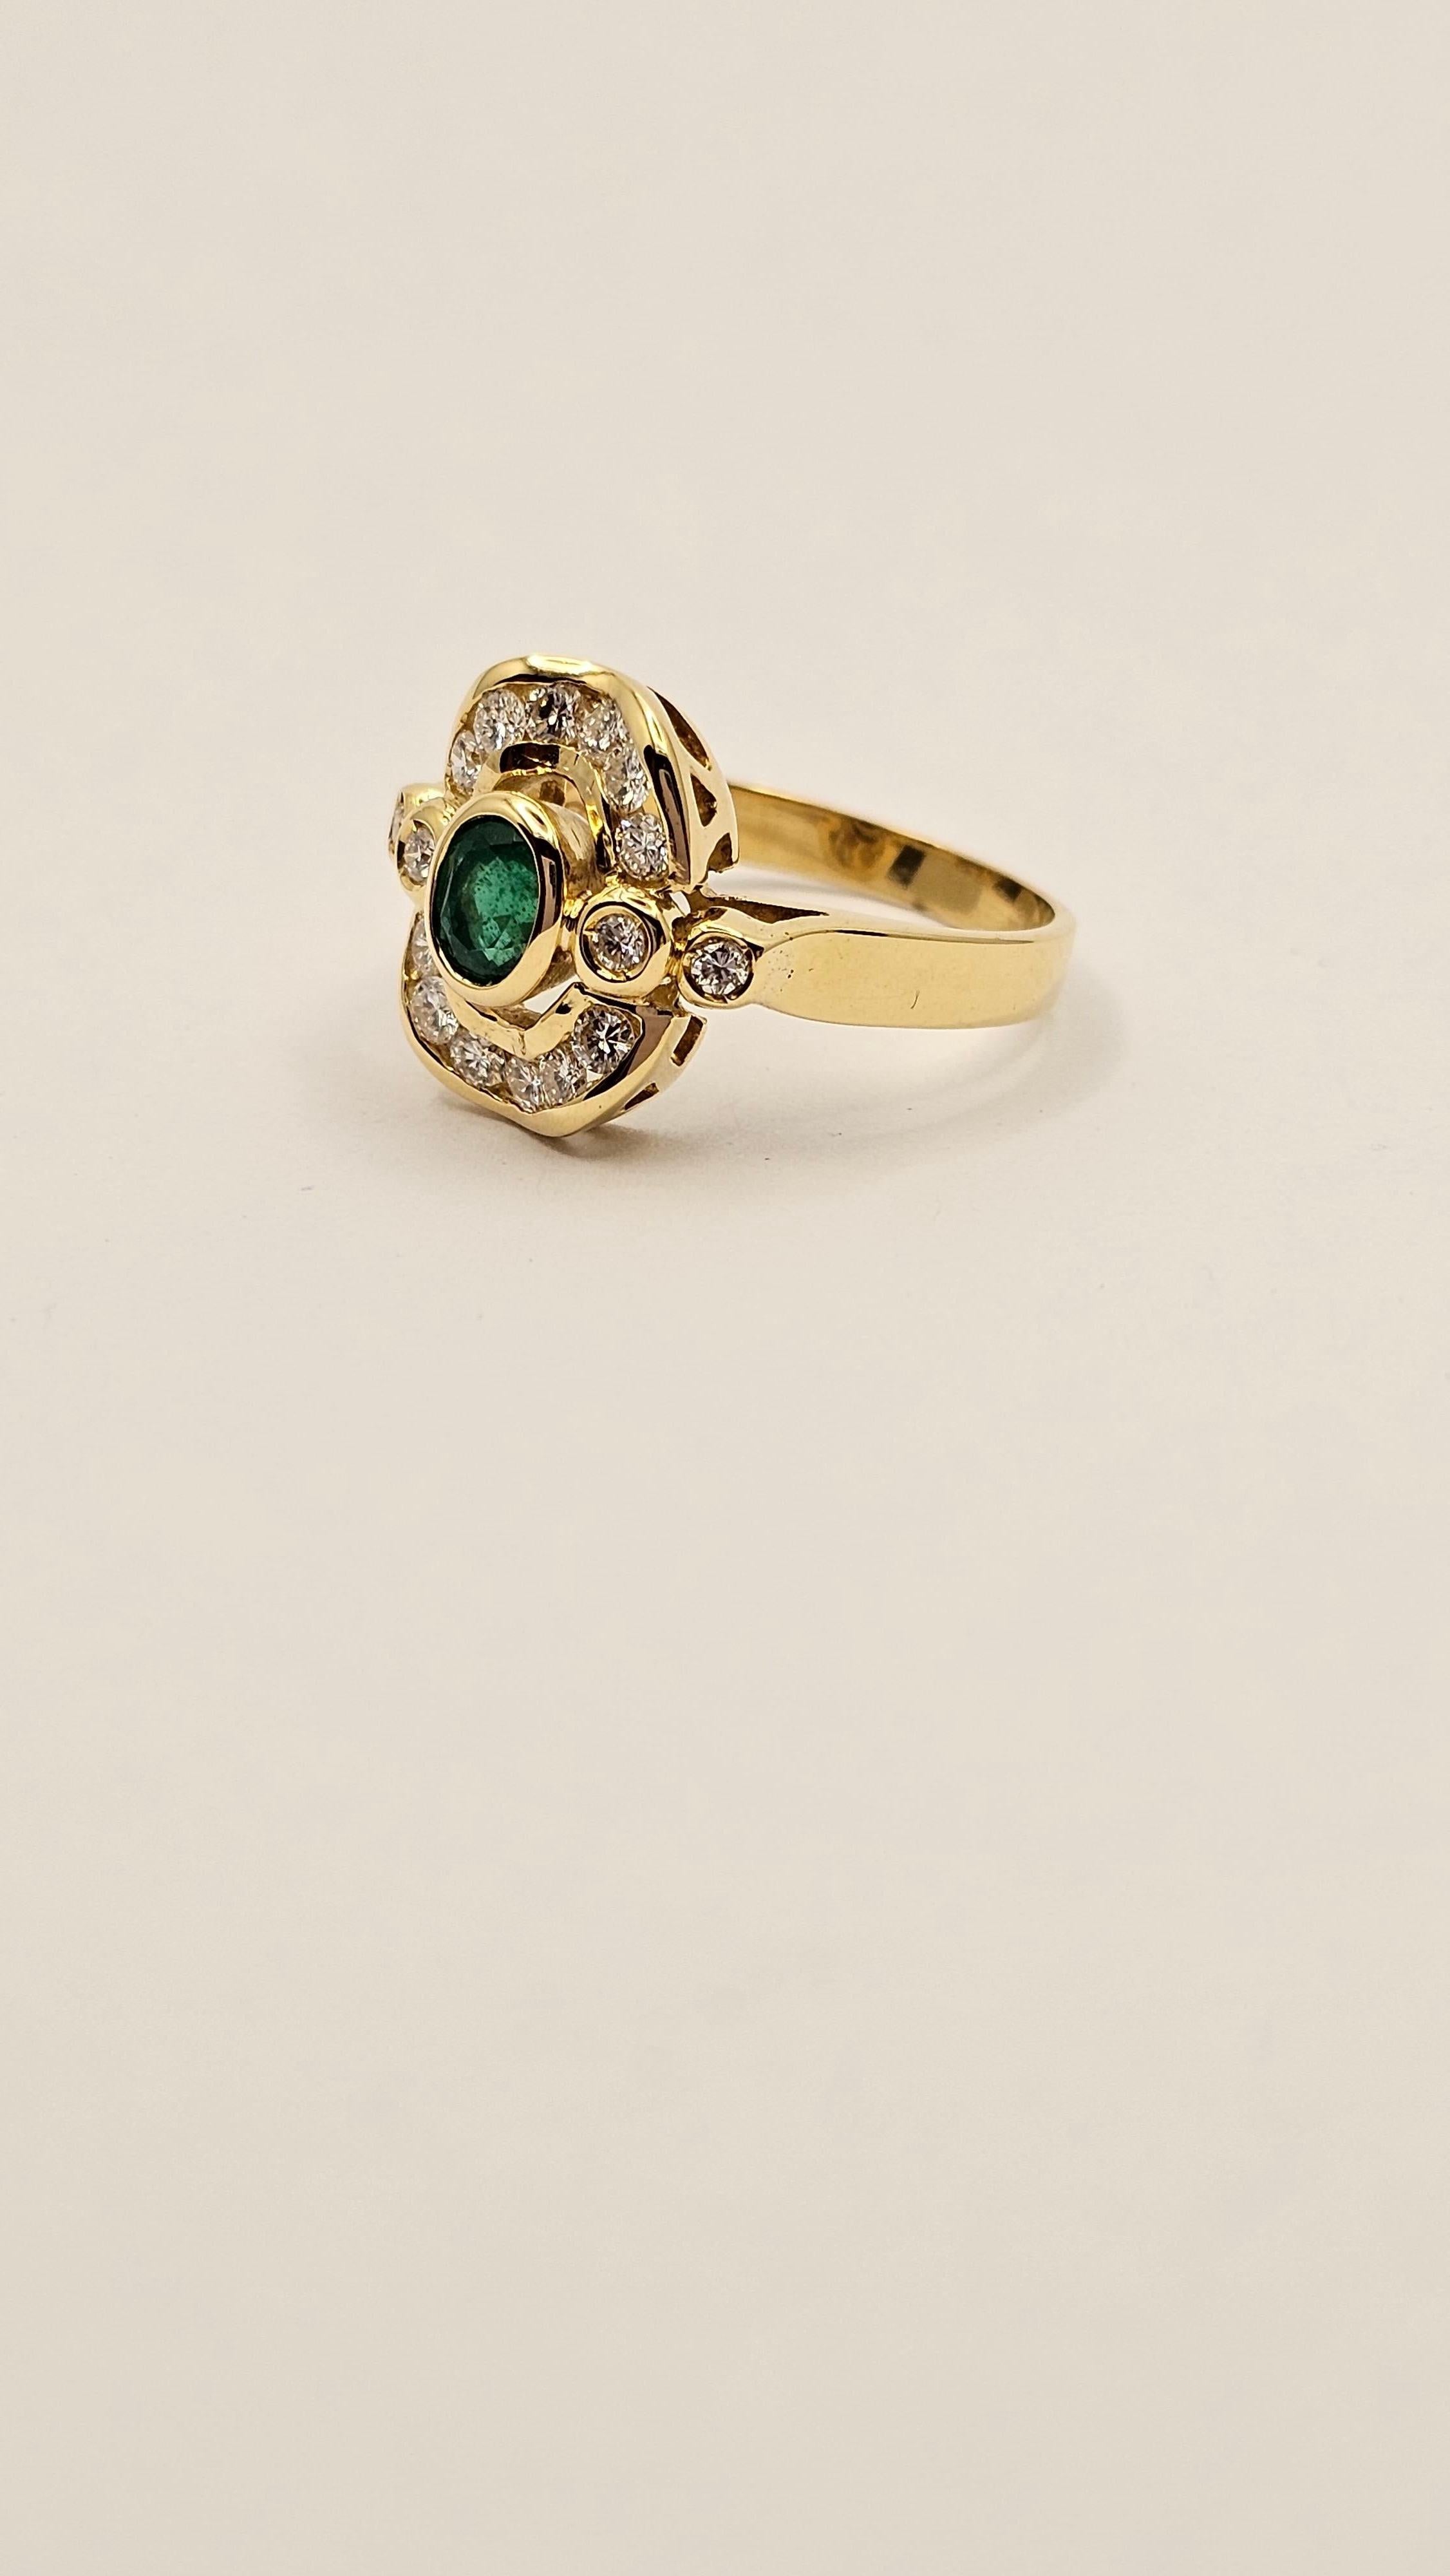 A yellow gold ring, solid, 18 kt.
set in the central part is a faceted oval-cut Colombian Emerald of a beautiful deep green. The measurements of the stone are approximately 5x4 mm. The weight of the Emerald is 0.52 carats.
The stone is very